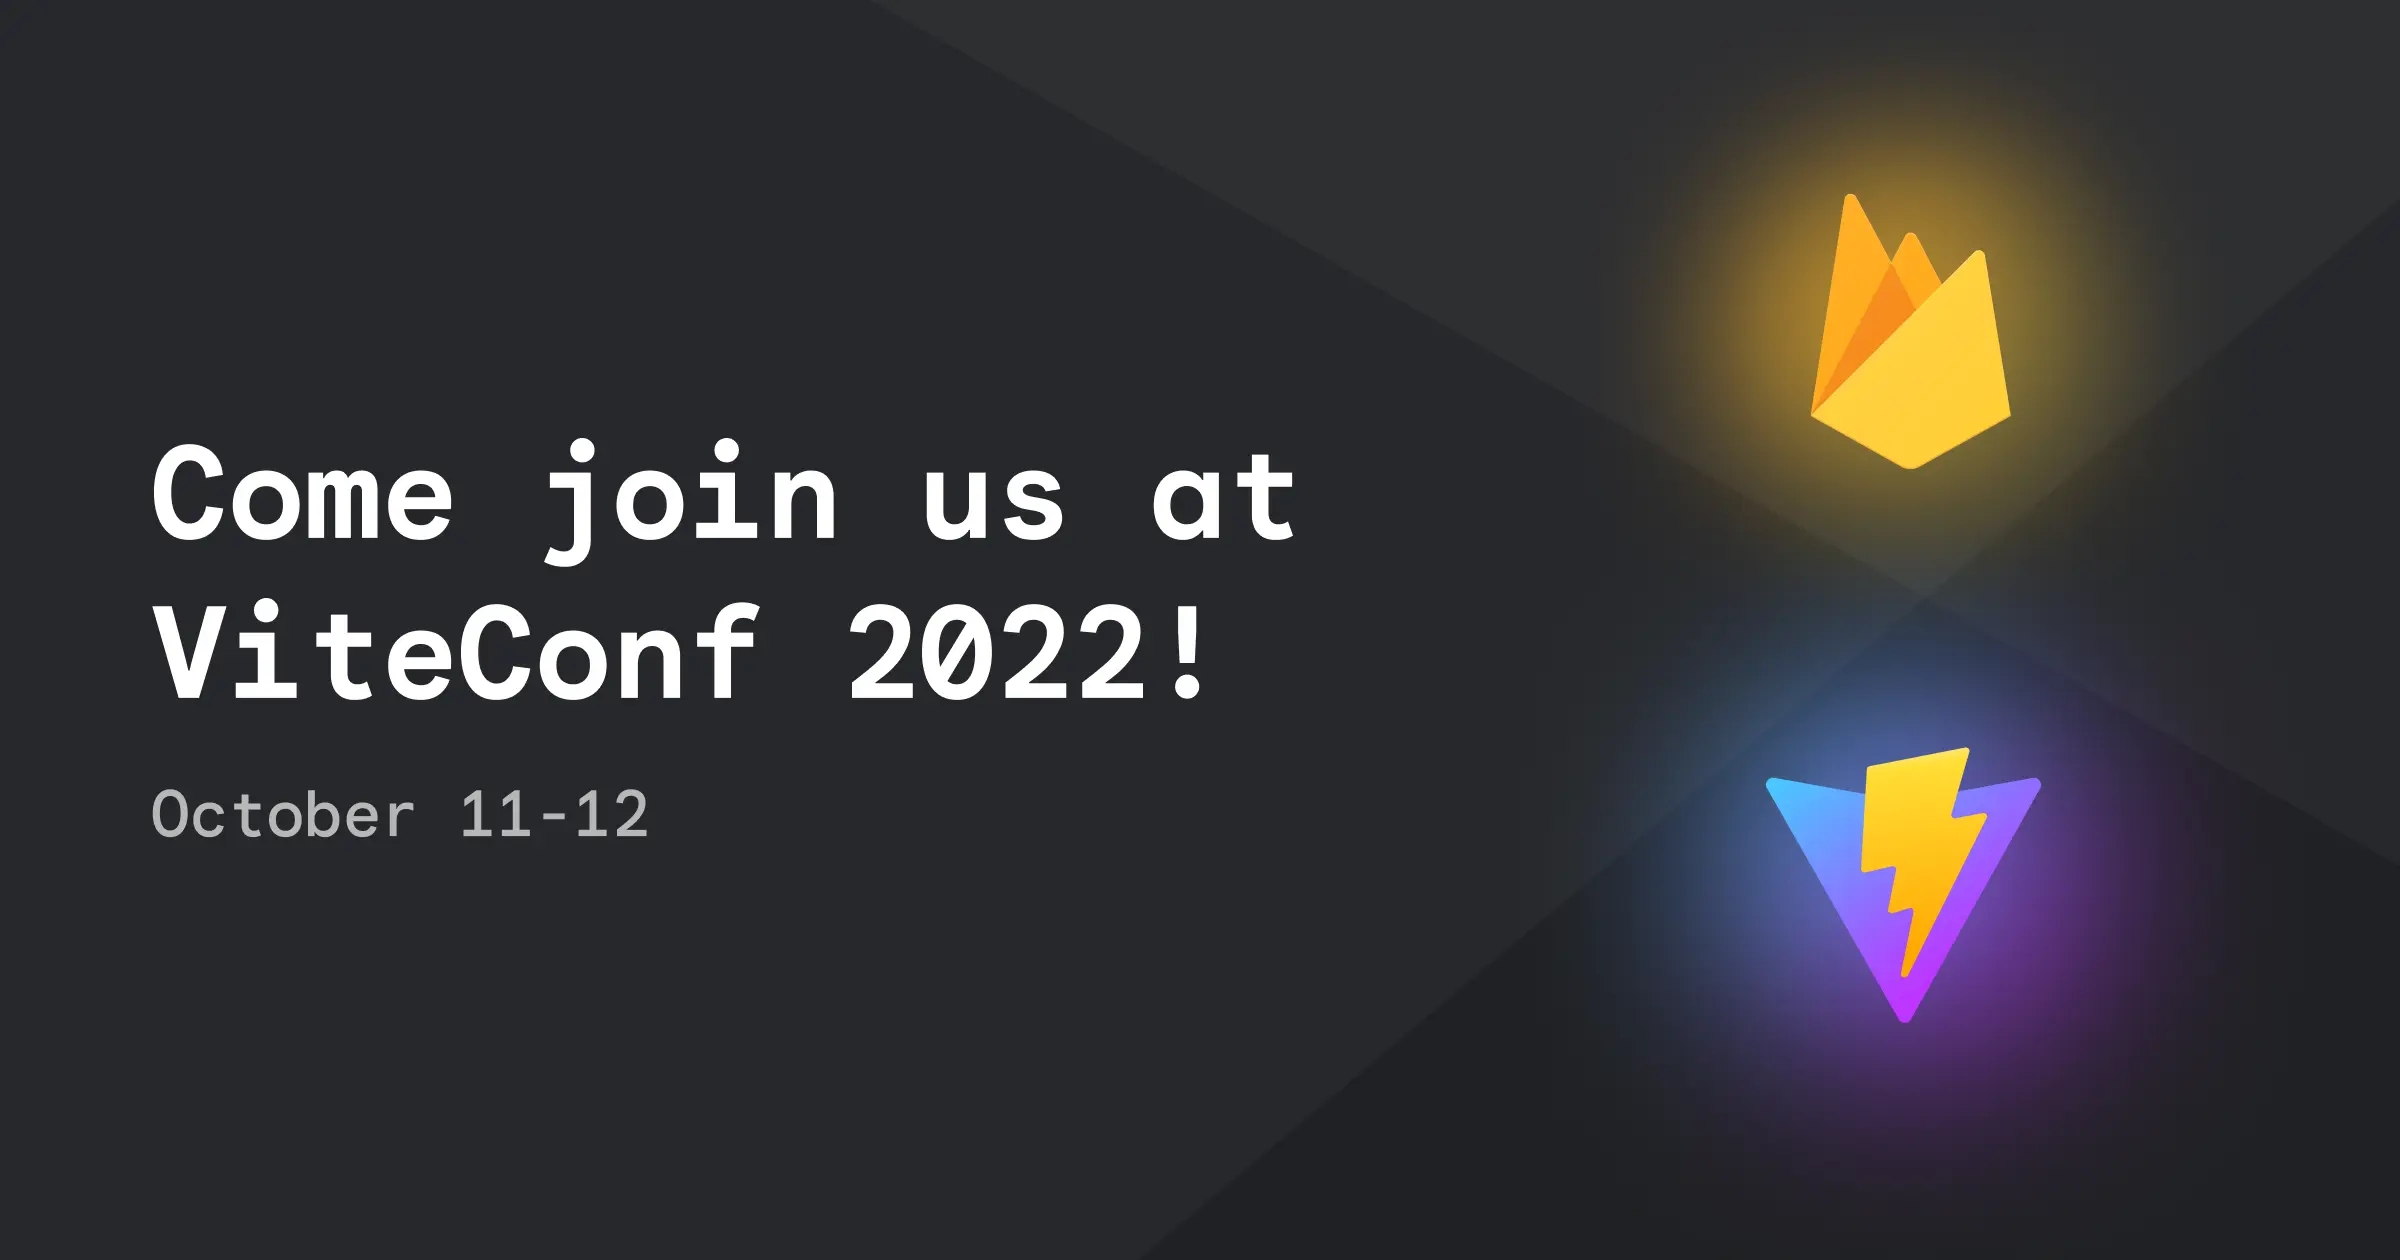 A thumbnail that shows text "Come join us at ViteConf 2022!" with the Vite and Firebase logos.